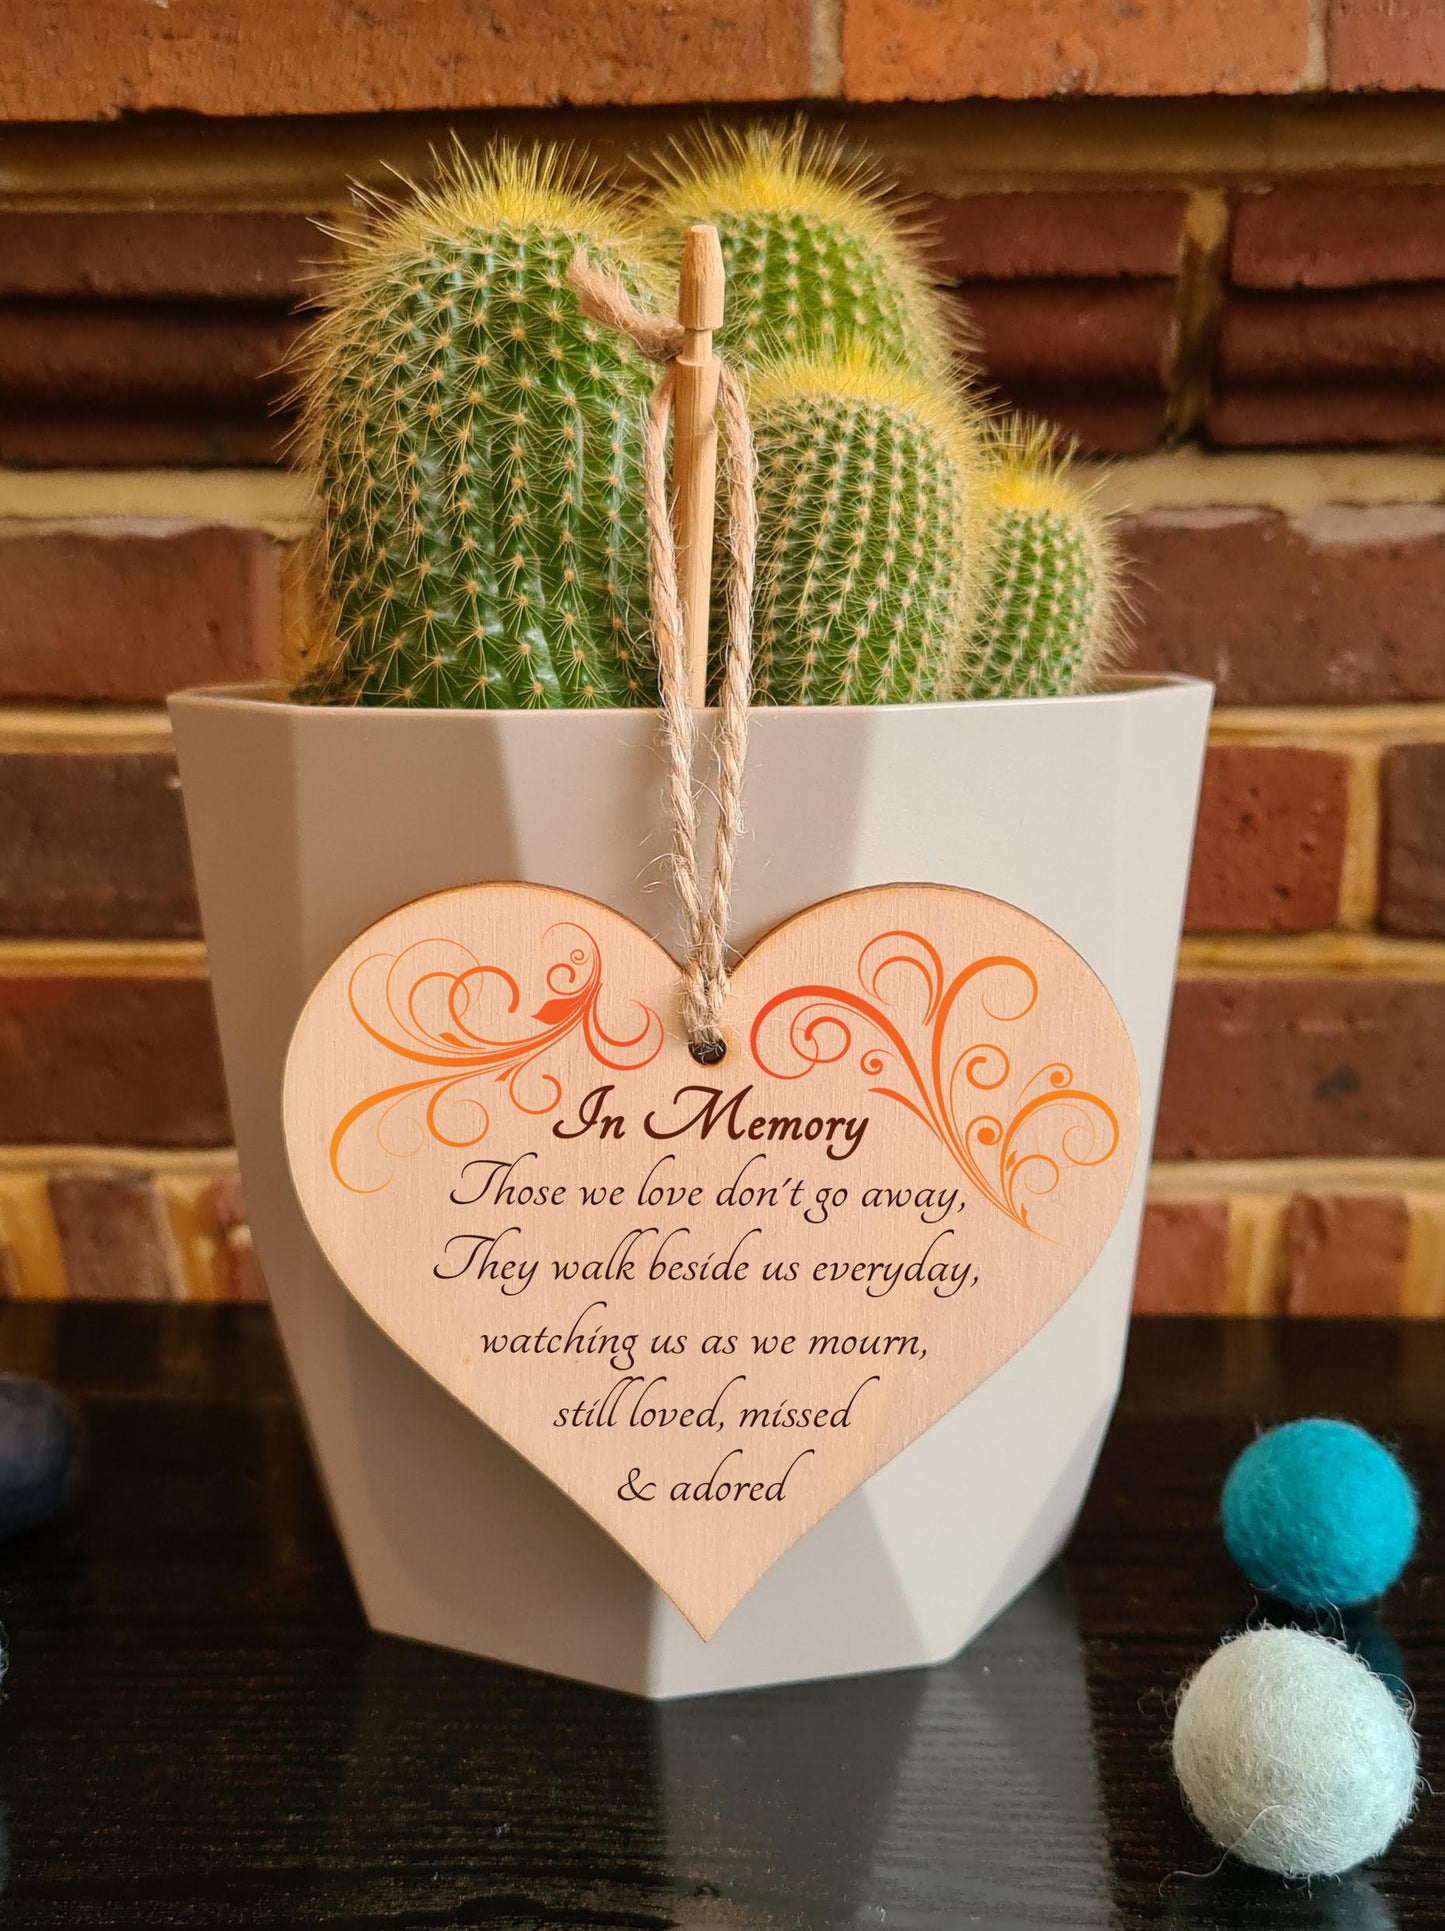 Handmade Wooden Hanging Heart Plaque Gift to Remember Lost Loved Ones